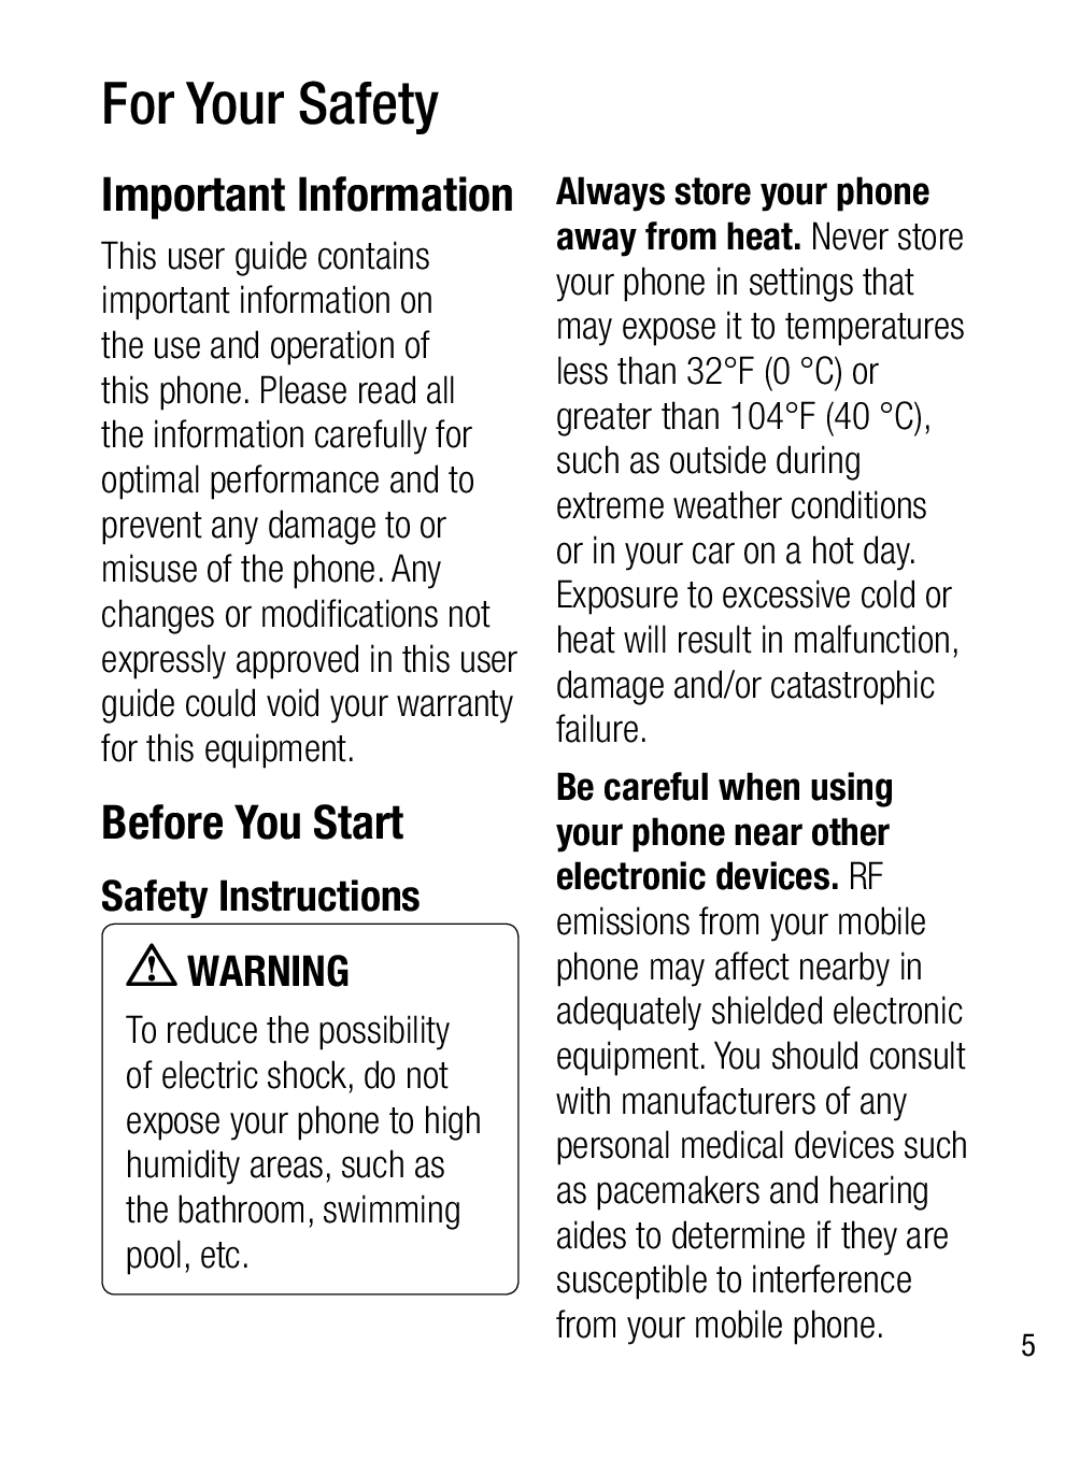 LG Electronics A133CH manual For Your Safety, Important Information, Before You Start, Safety Instructions 